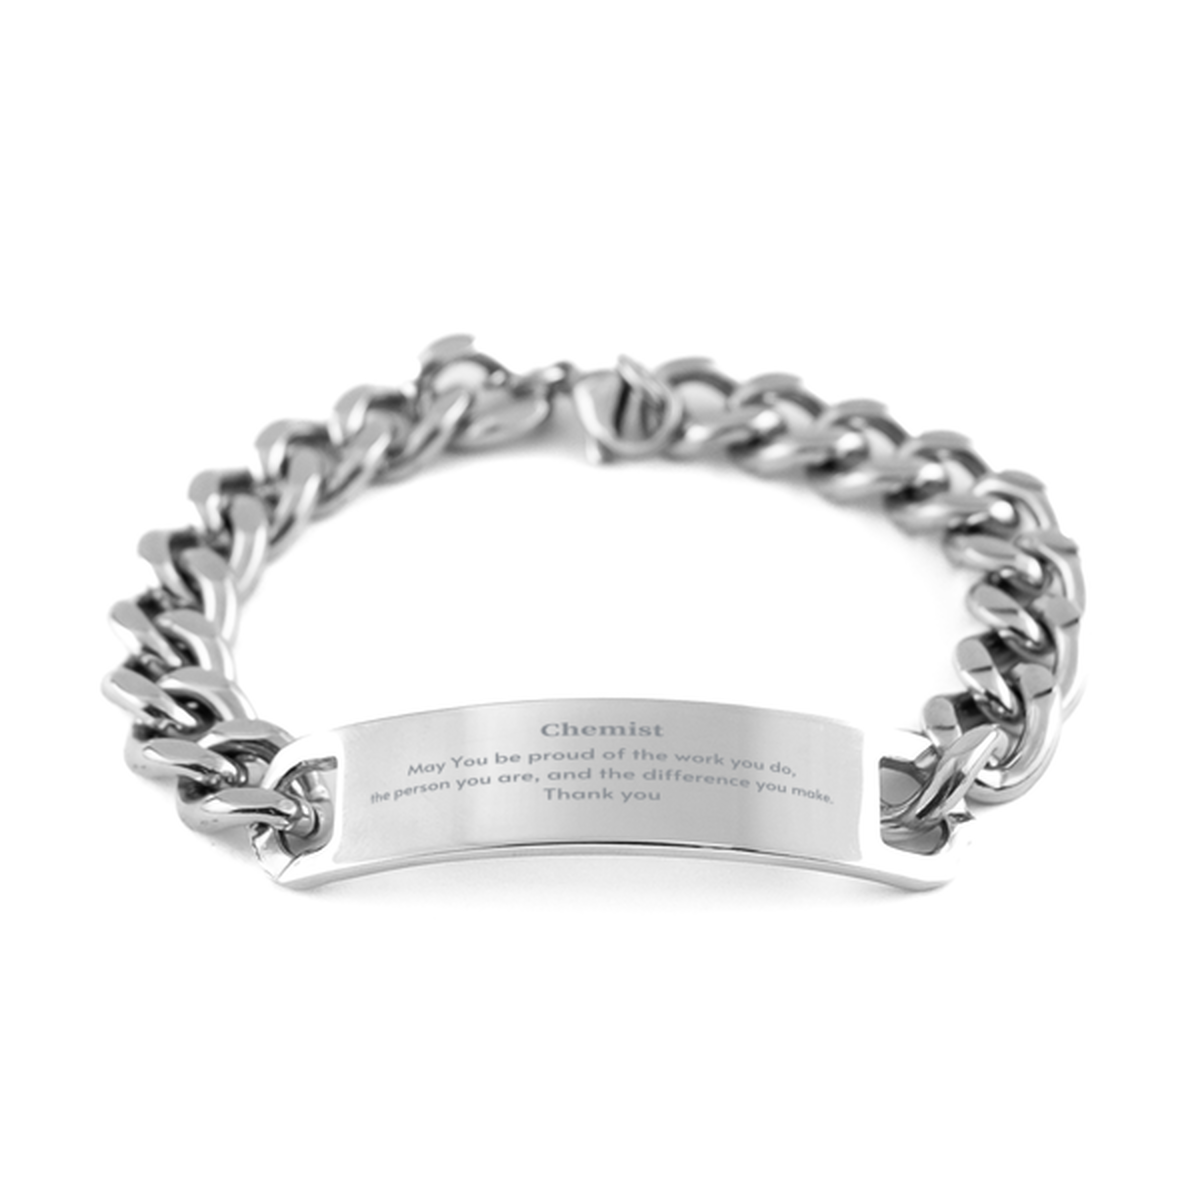 Heartwarming Cuban Chain Stainless Steel Bracelet Retirement Coworkers Gifts for Chemist, Chemist May You be proud of the work you do, the person you are Gifts for Boss Men Women Friends